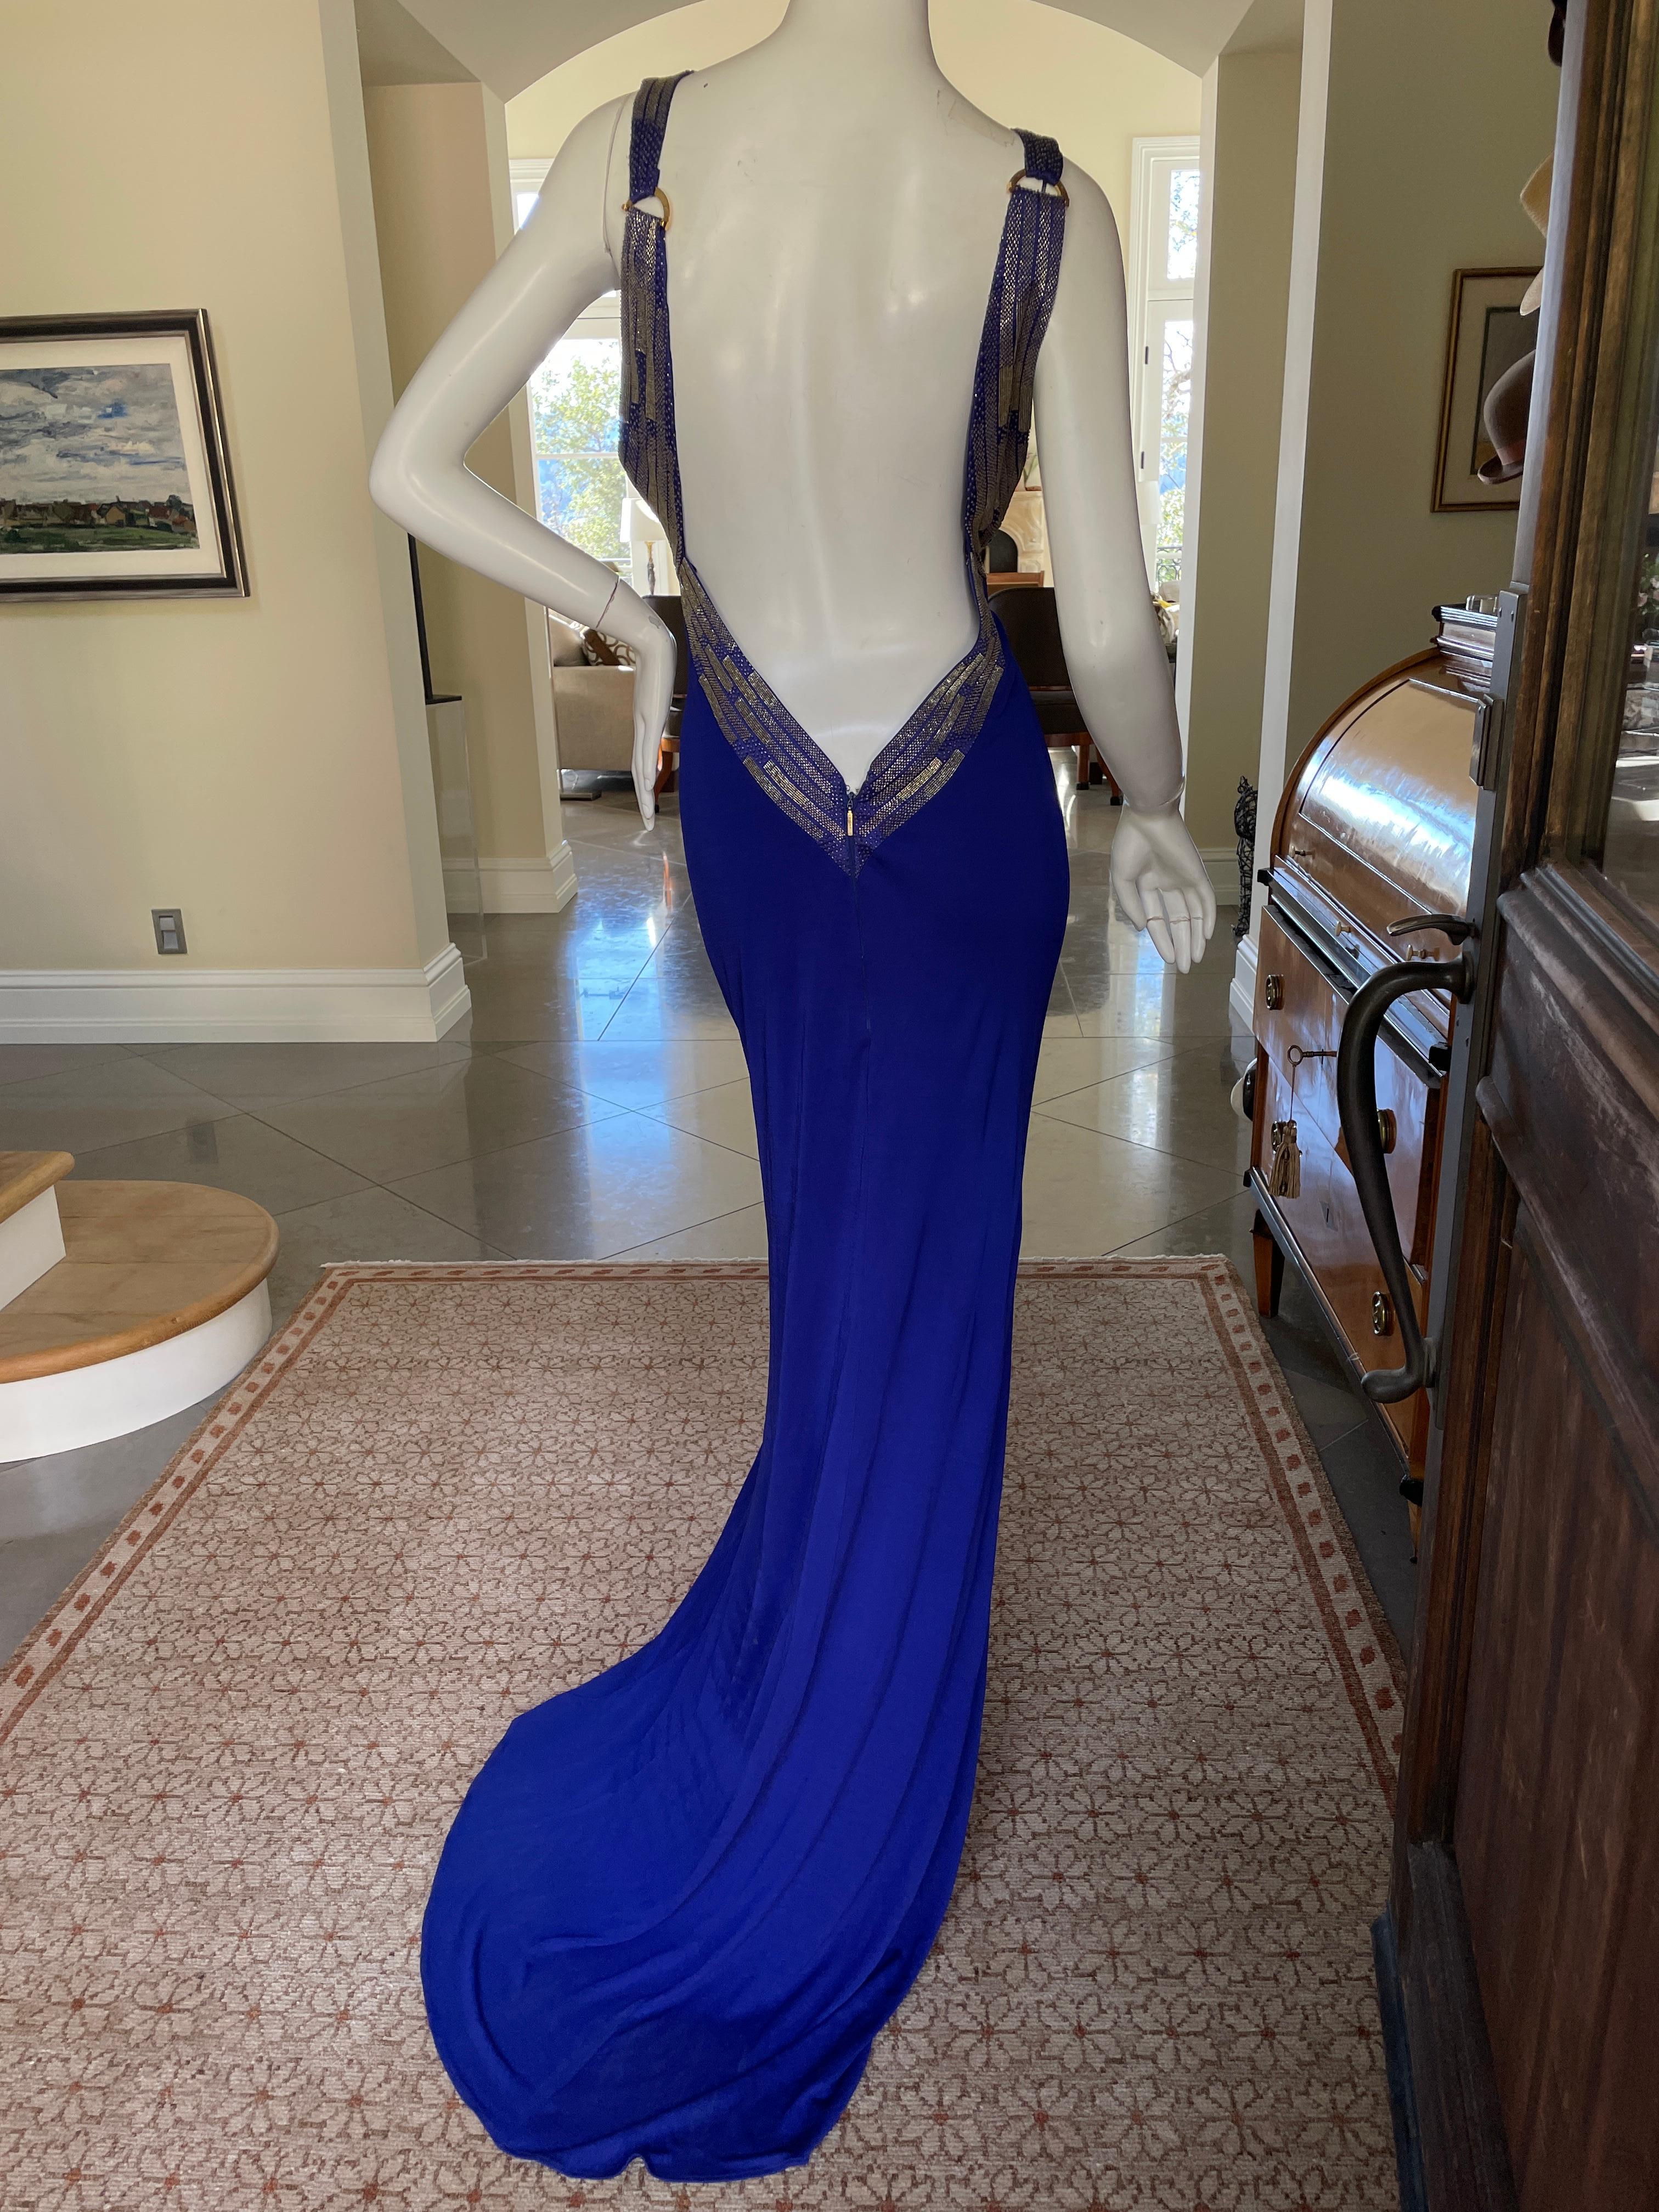 Roberto Cavalli Vintage Crystal Embellished Evening Dress Plunging Front & Back In Excellent Condition For Sale In Cloverdale, CA